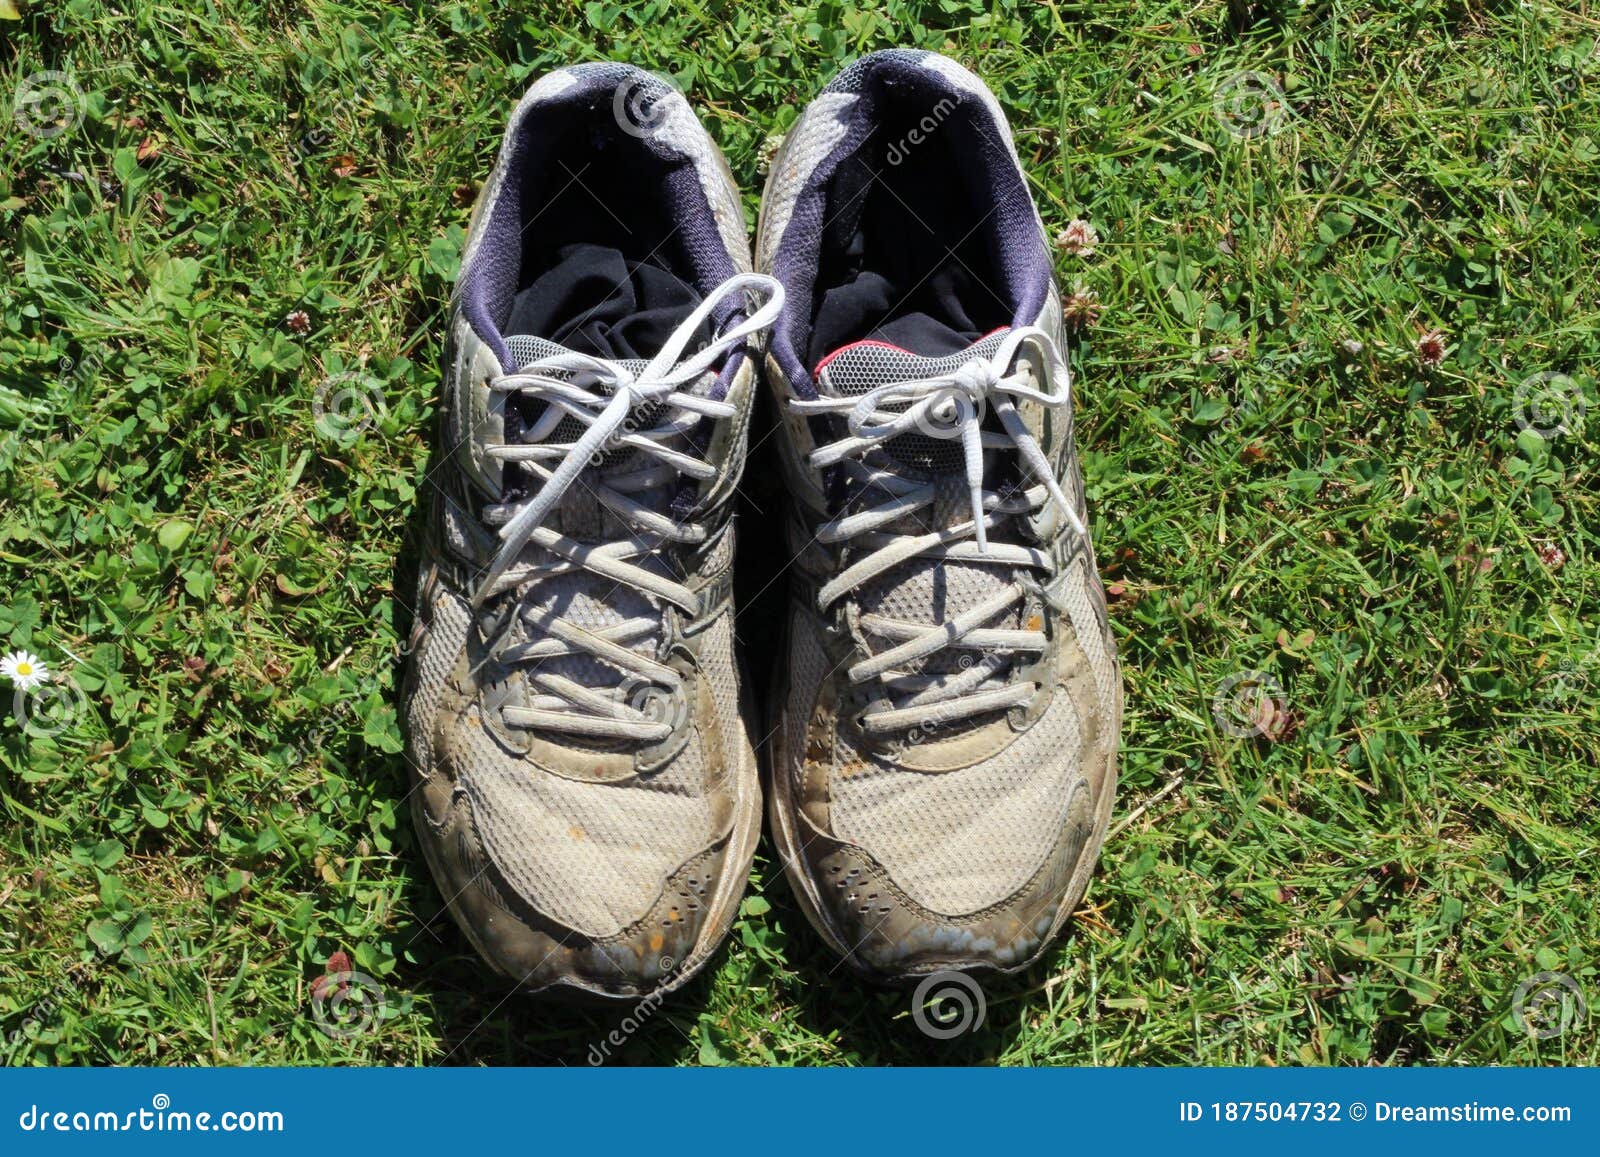 Pair of Dirty Used Trainers Stock Photo - Image of sport, muddy: 187504732